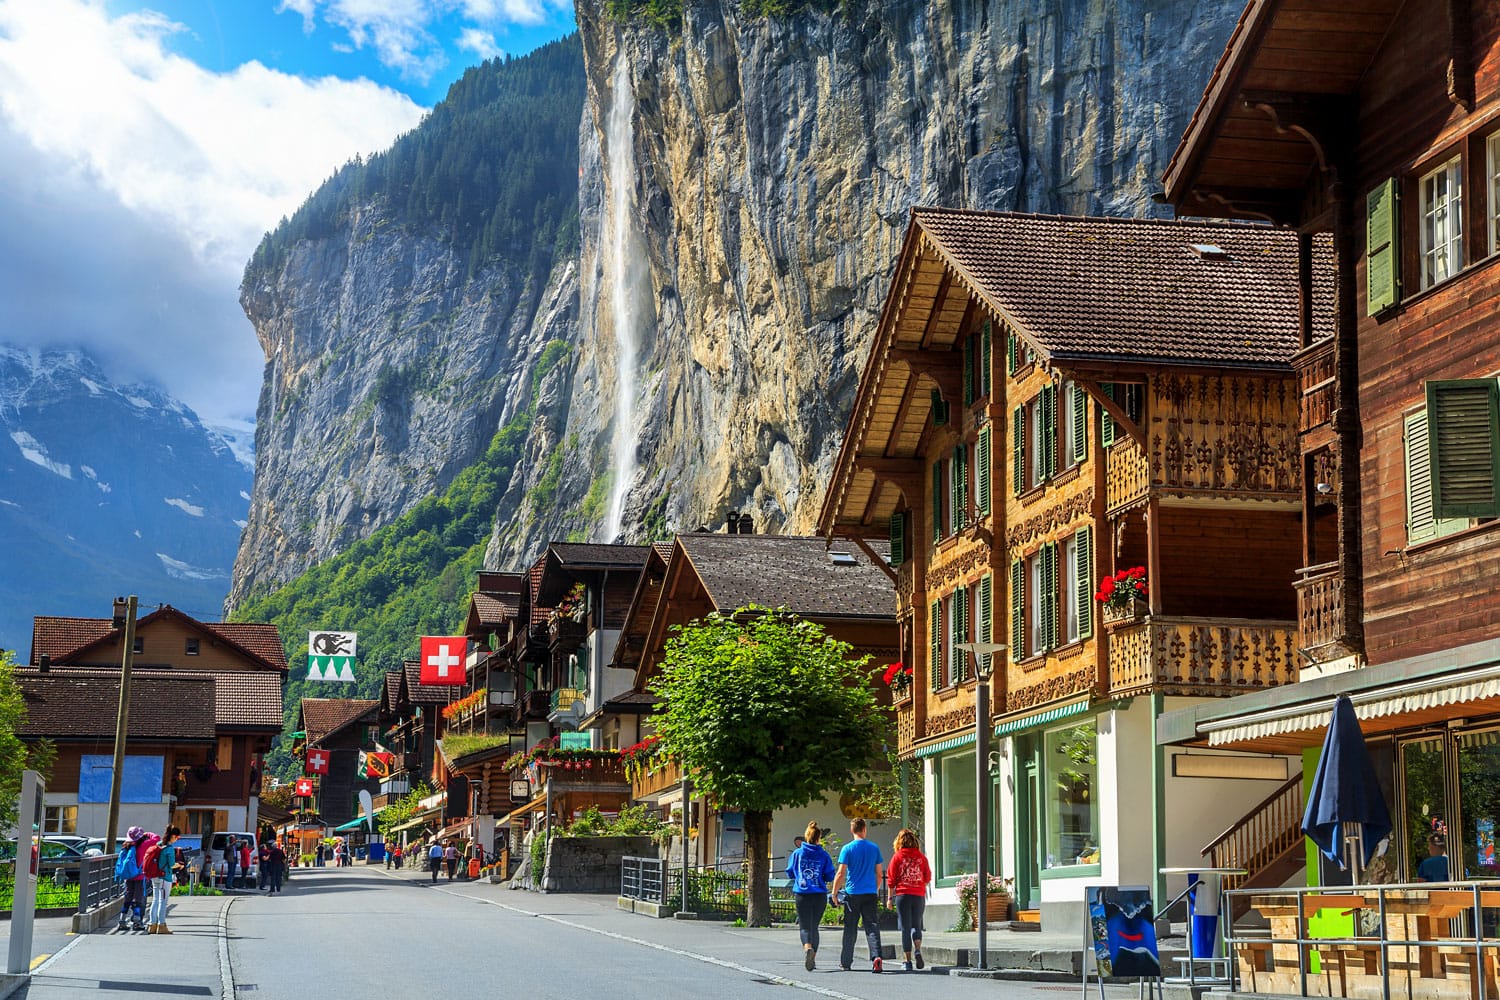 Spectacular principal street of Lauterbrunnen with shops,hotels,terraces,swiss flags and stunning Staubbach waterfall in background, Bernese Oberland, Switzerland